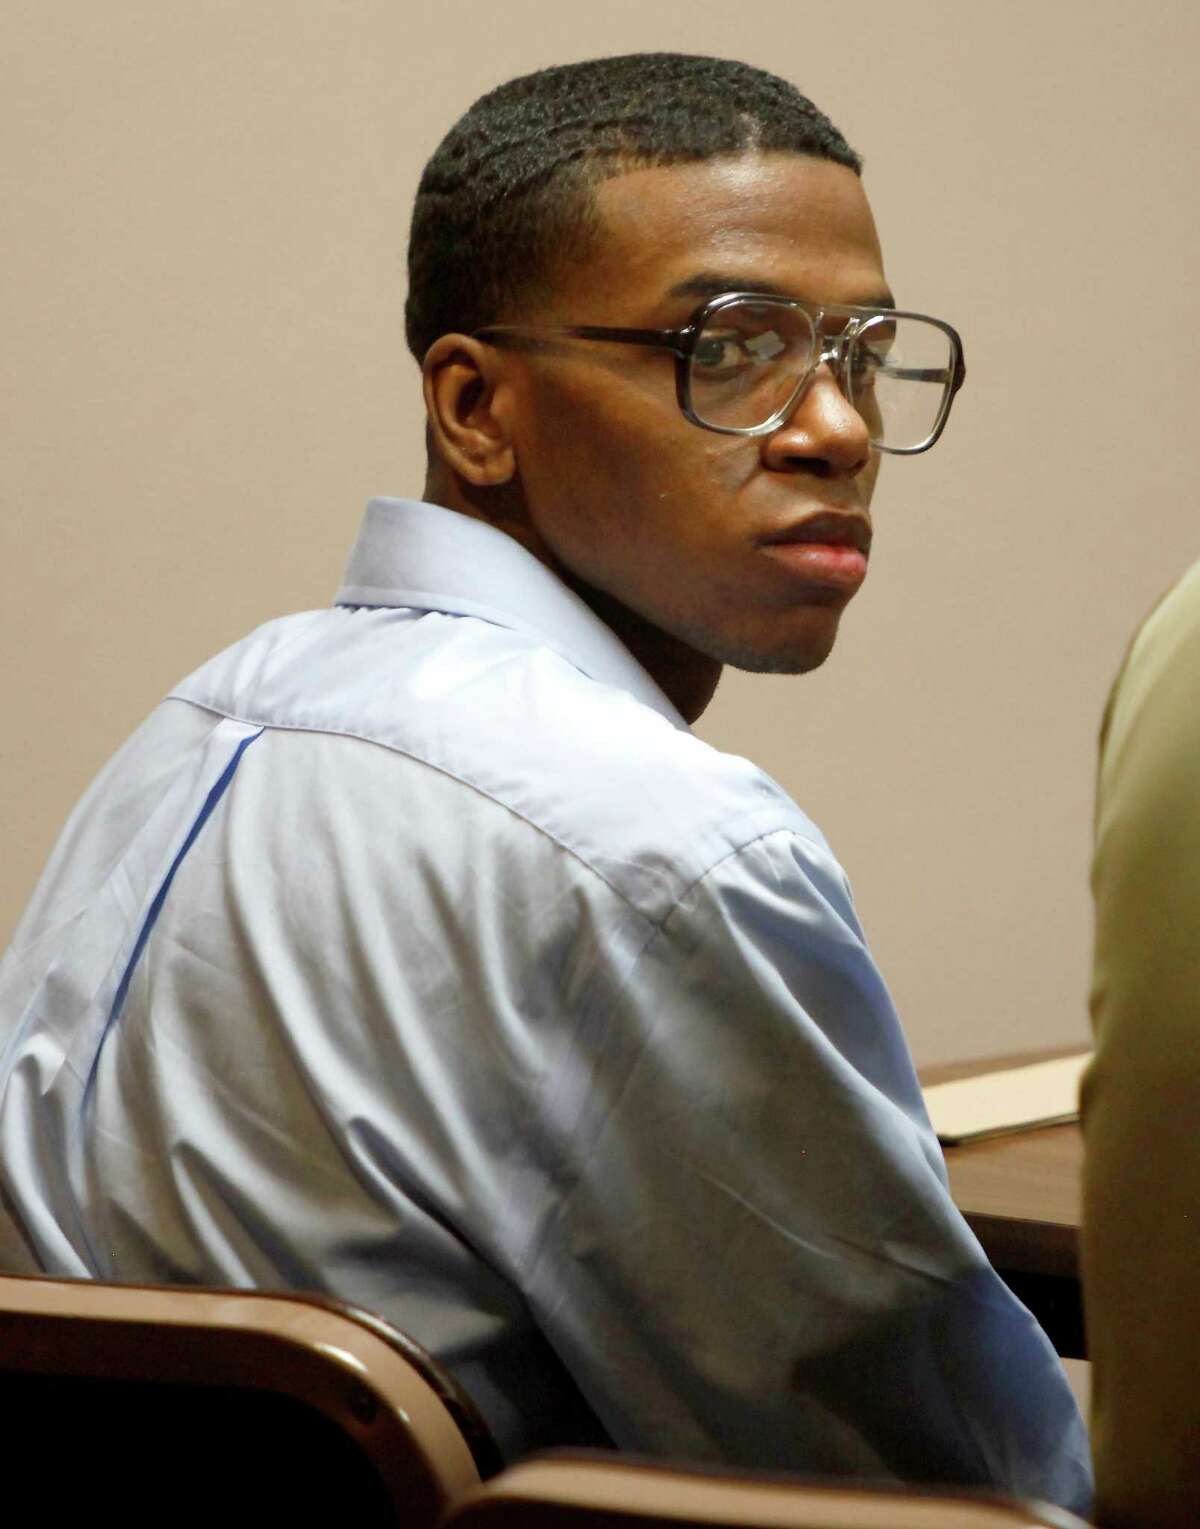 Lorenzo Leroy Thompson looks around the courtroom. He had admitted attempting to steal the victim’s purse, which ultimately led to her death.